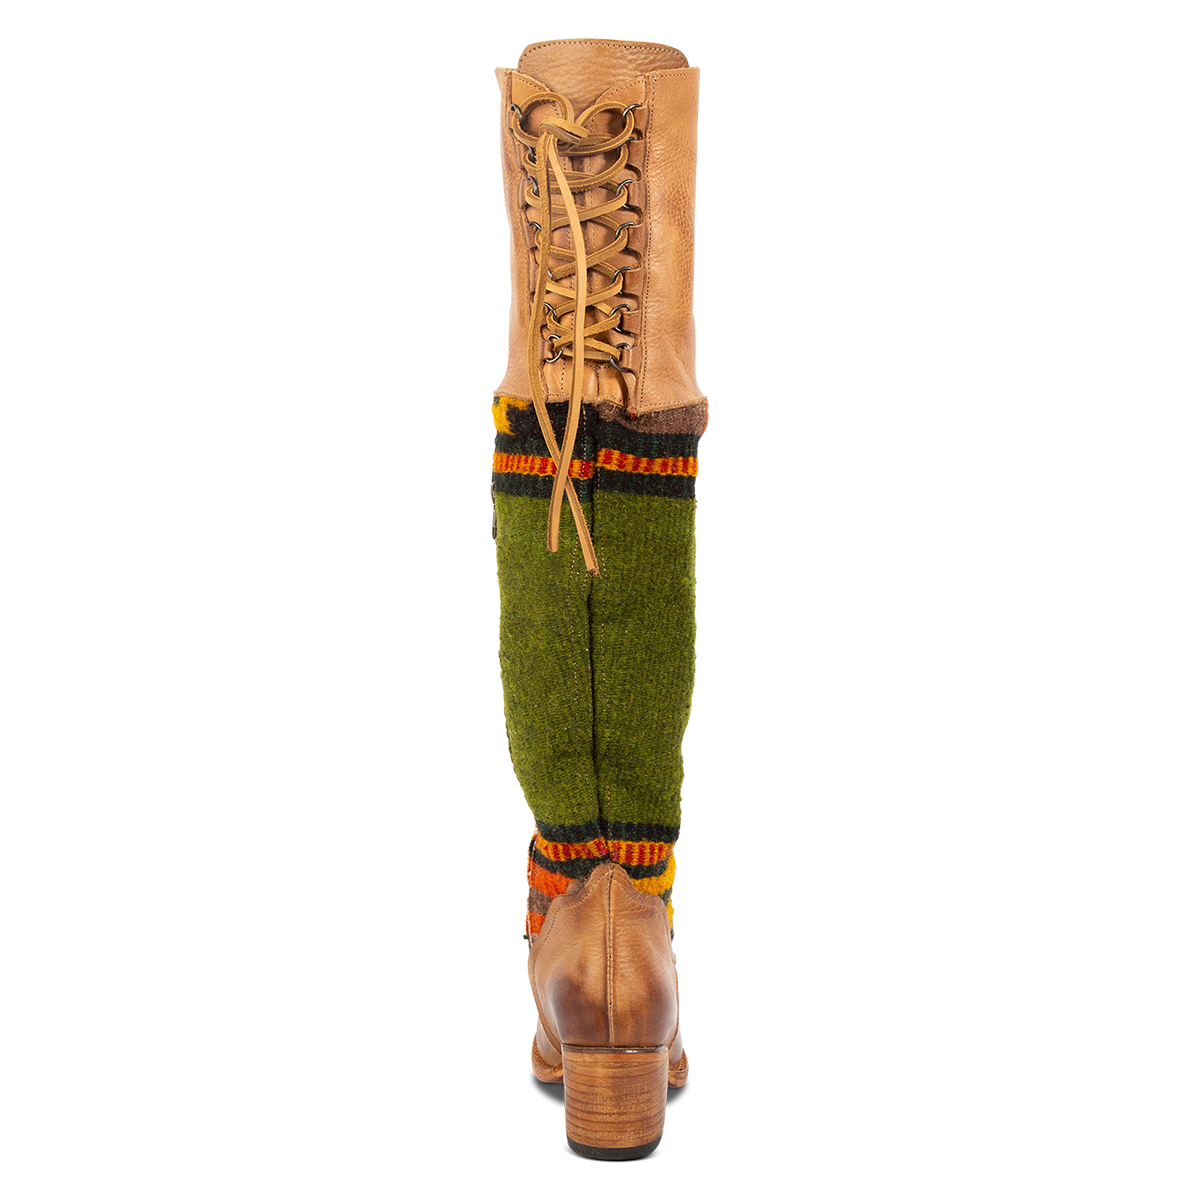 Back view showing adjustable leather lacing, a stacked heel and multi-colored woven detailing on FREEBIRD women's Serape tan leather knee high boot